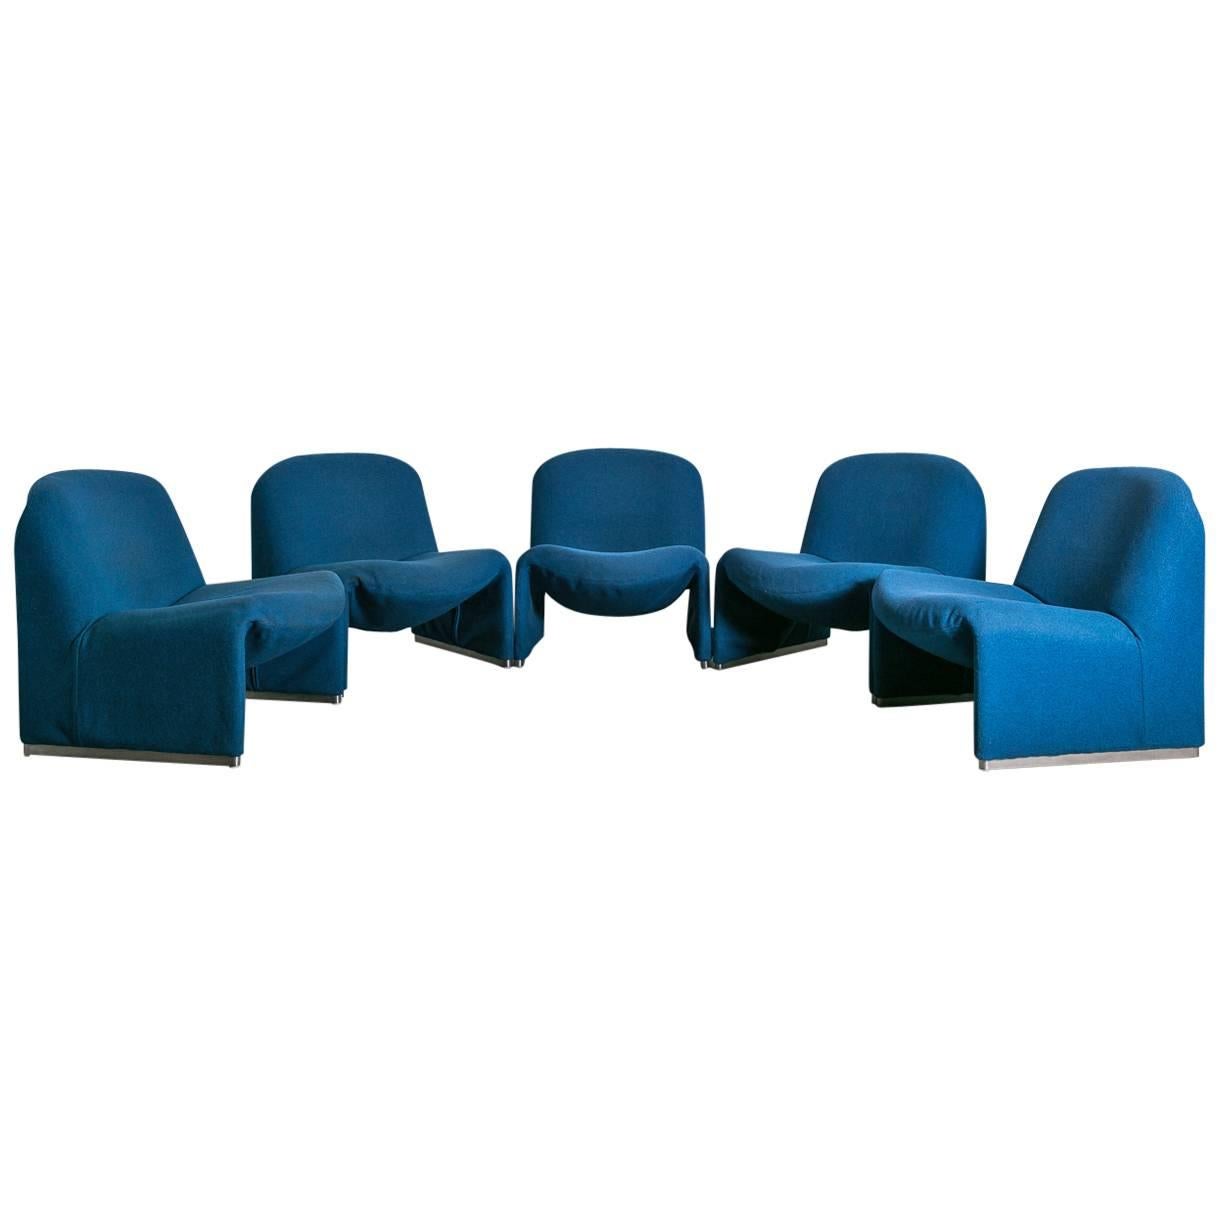 Set of three "Alky" Chairs by Giancarlo Piretti for Castelli, 1970, Italy